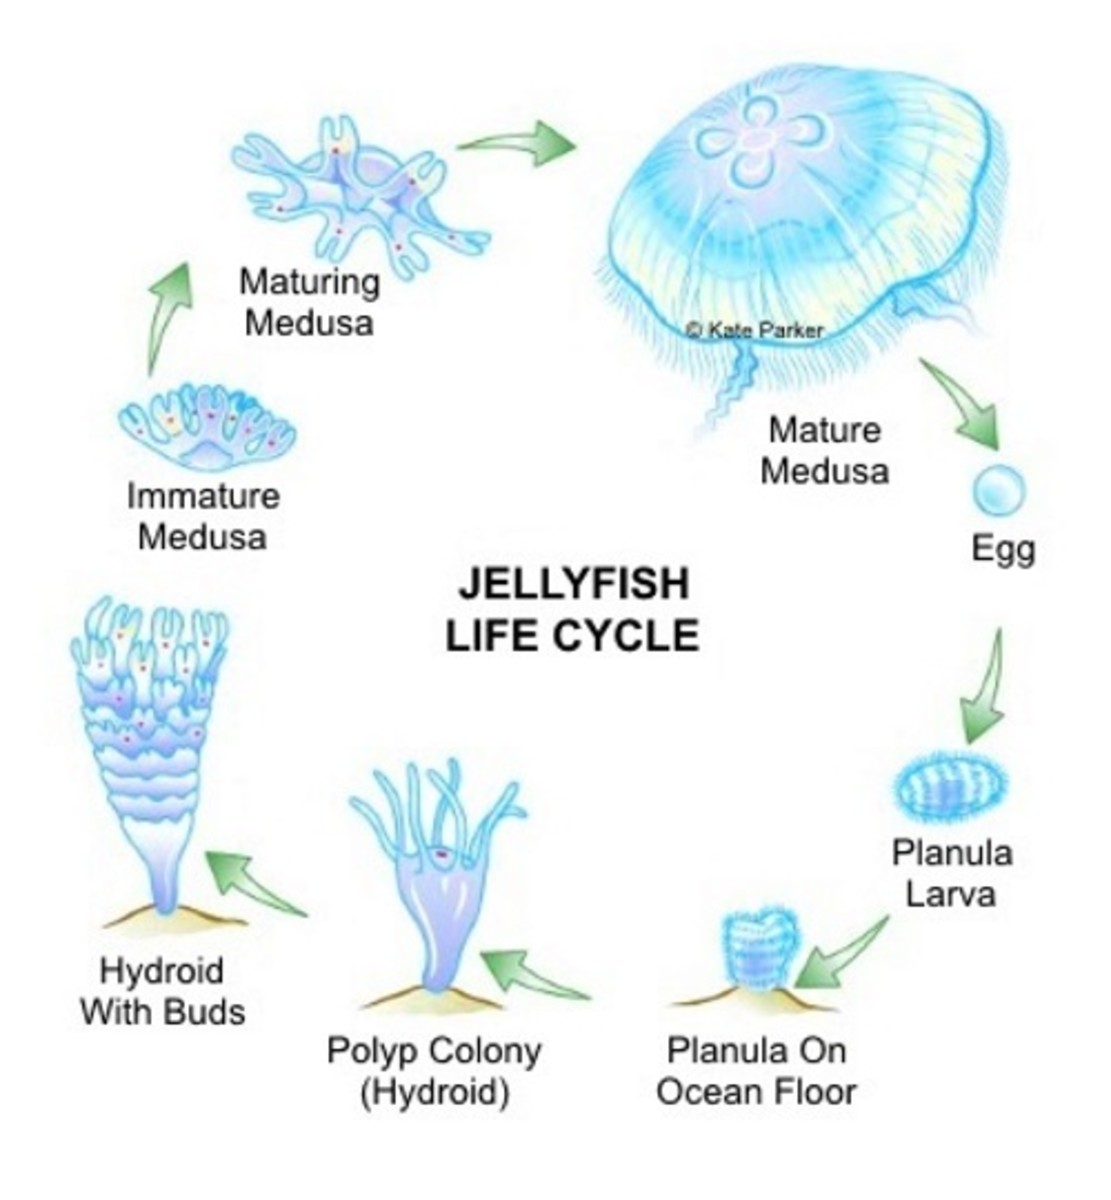 The basic life cycle of an average jellyfish.